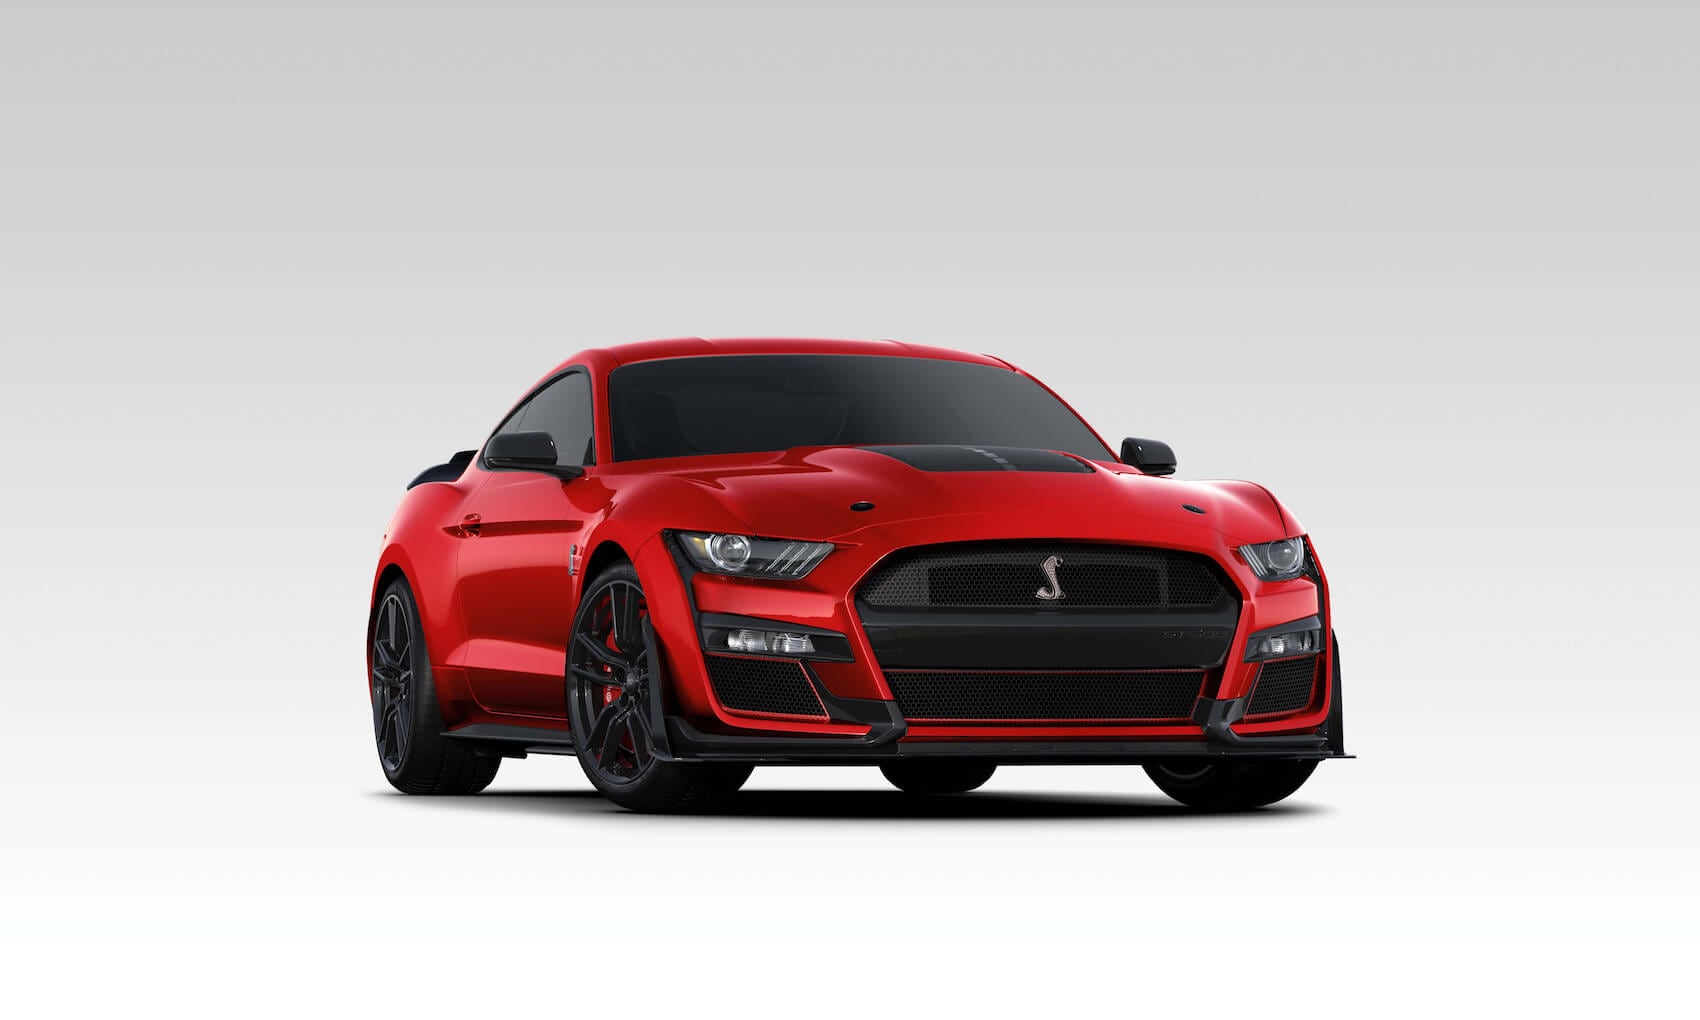 2021 Ford Mustang Cerritos CA | Norm Reeves Ford Superstore